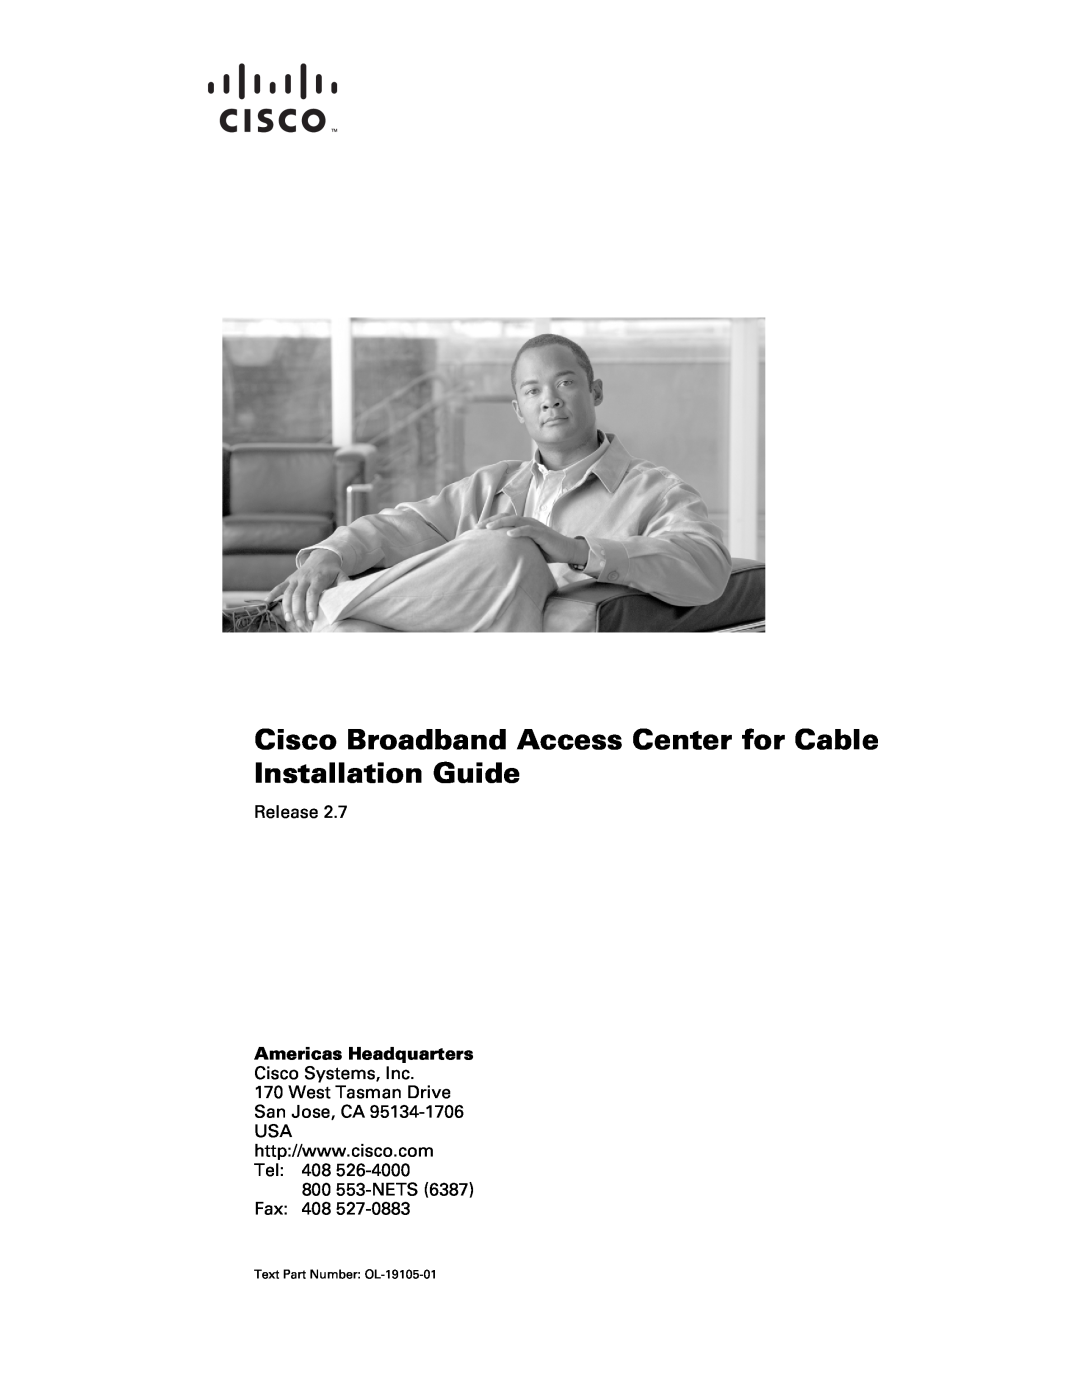 Cisco Systems Broadband Access Center manual Americas Headquarters, Release, 800 553-NETS Fax 408 